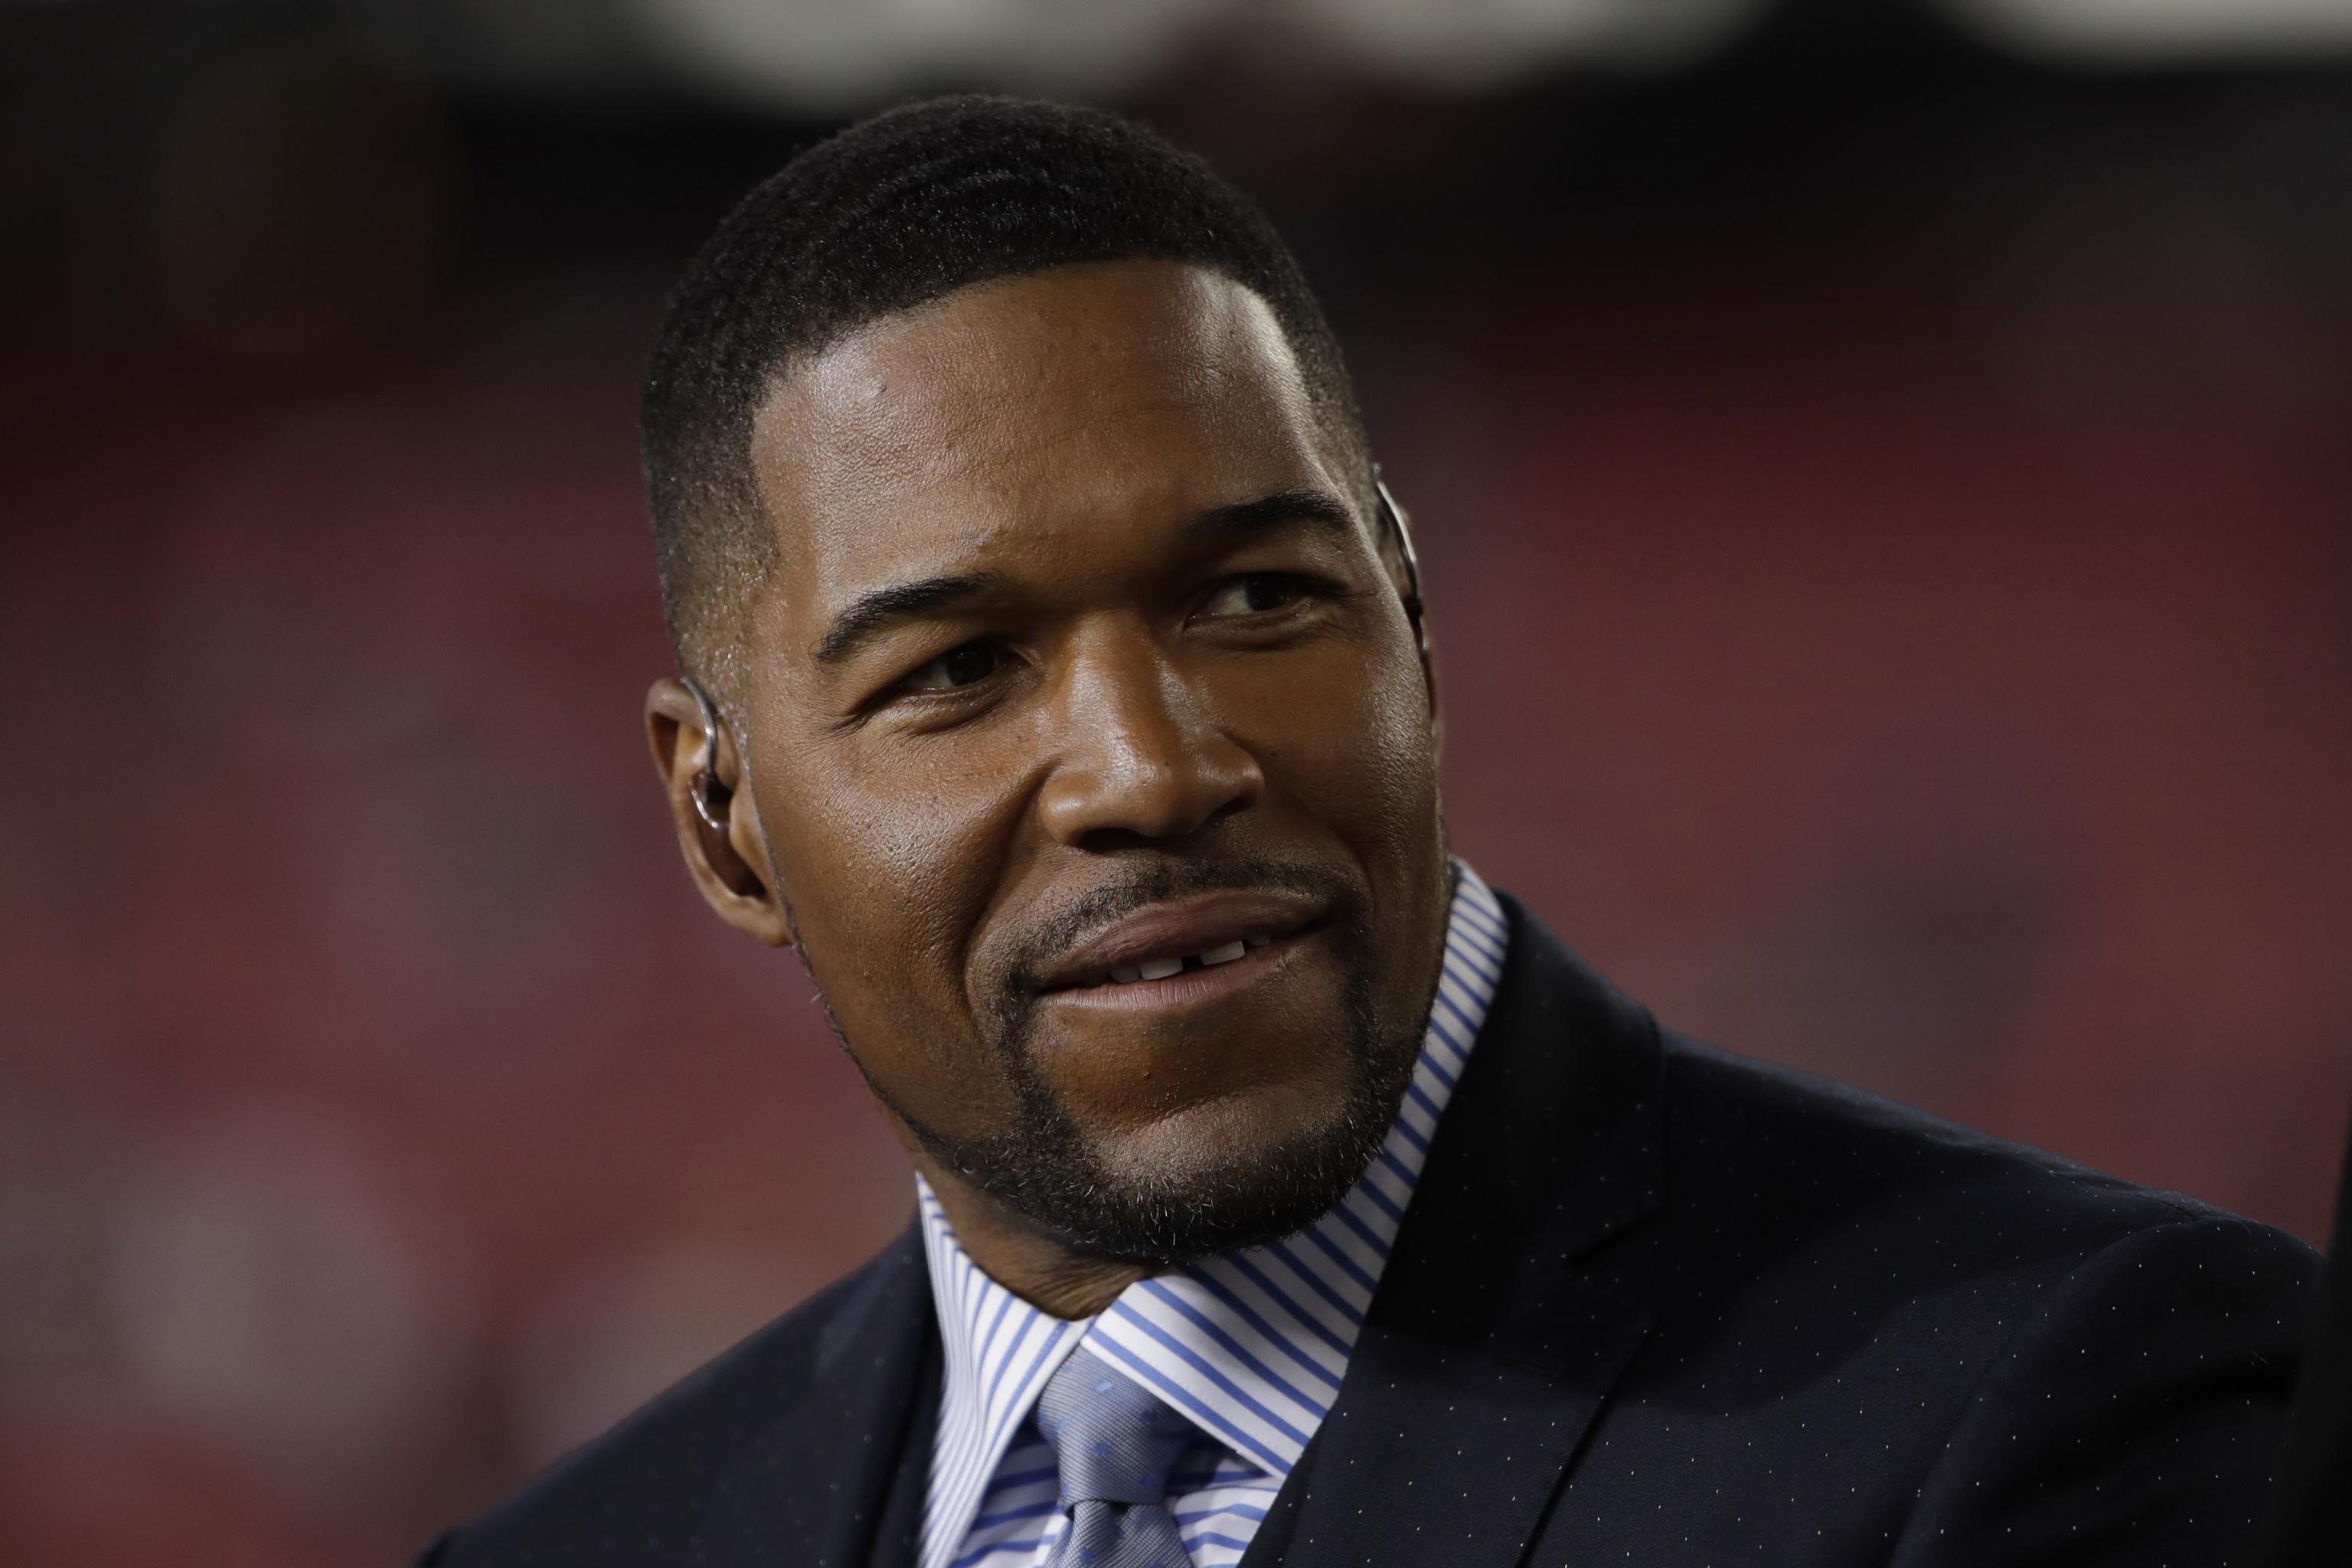 NY Giants Will Retire Michael Strahan's Number 92